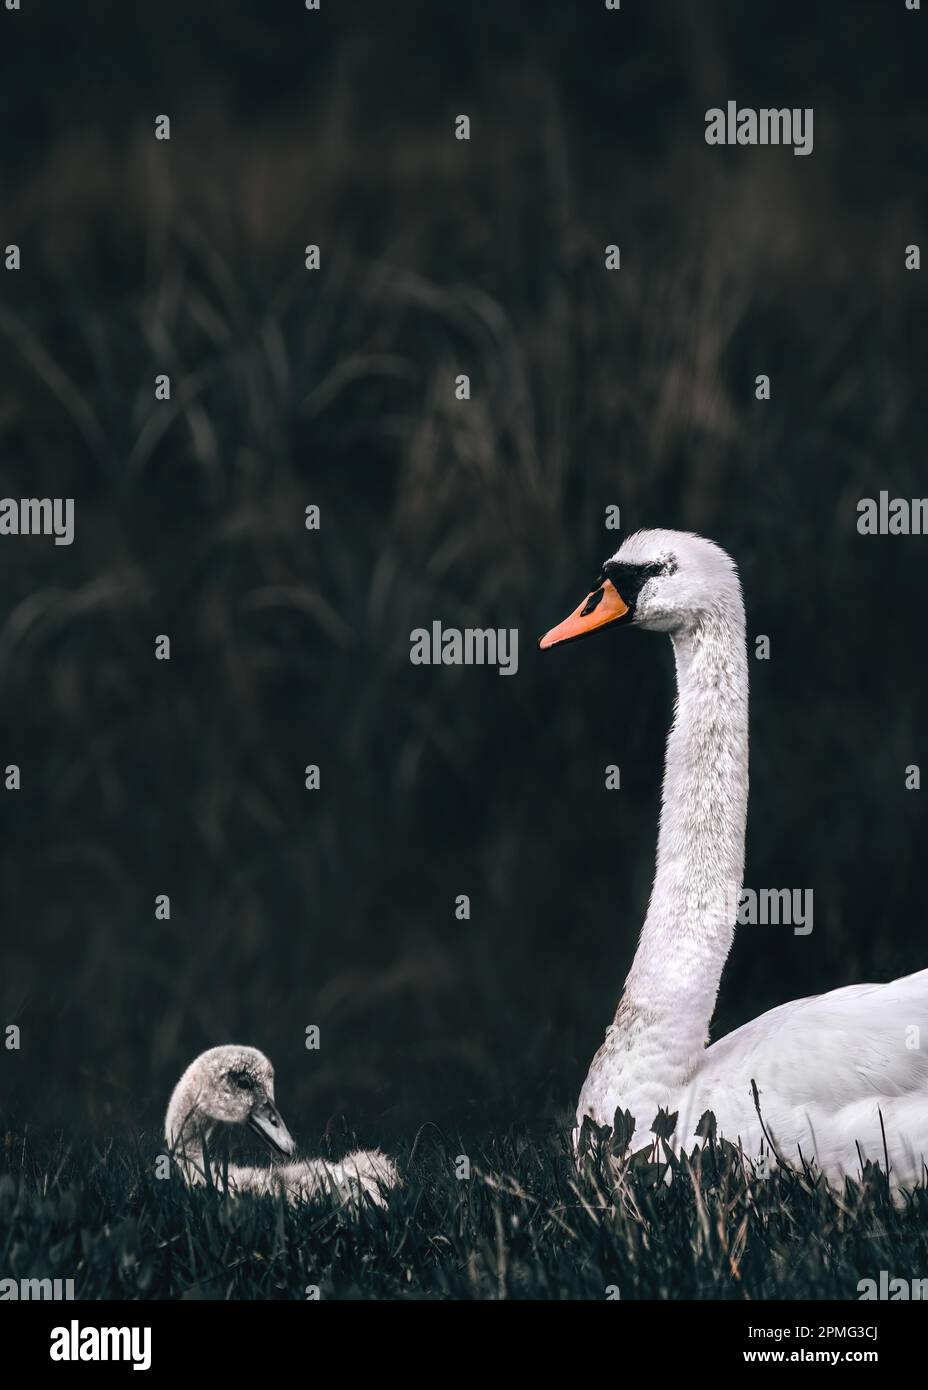 A swanling  or baby swan with its mother resting in grass with reed in the background; dark, somber and moody atmosphere, reduced colours, vintage sty Stock Photo